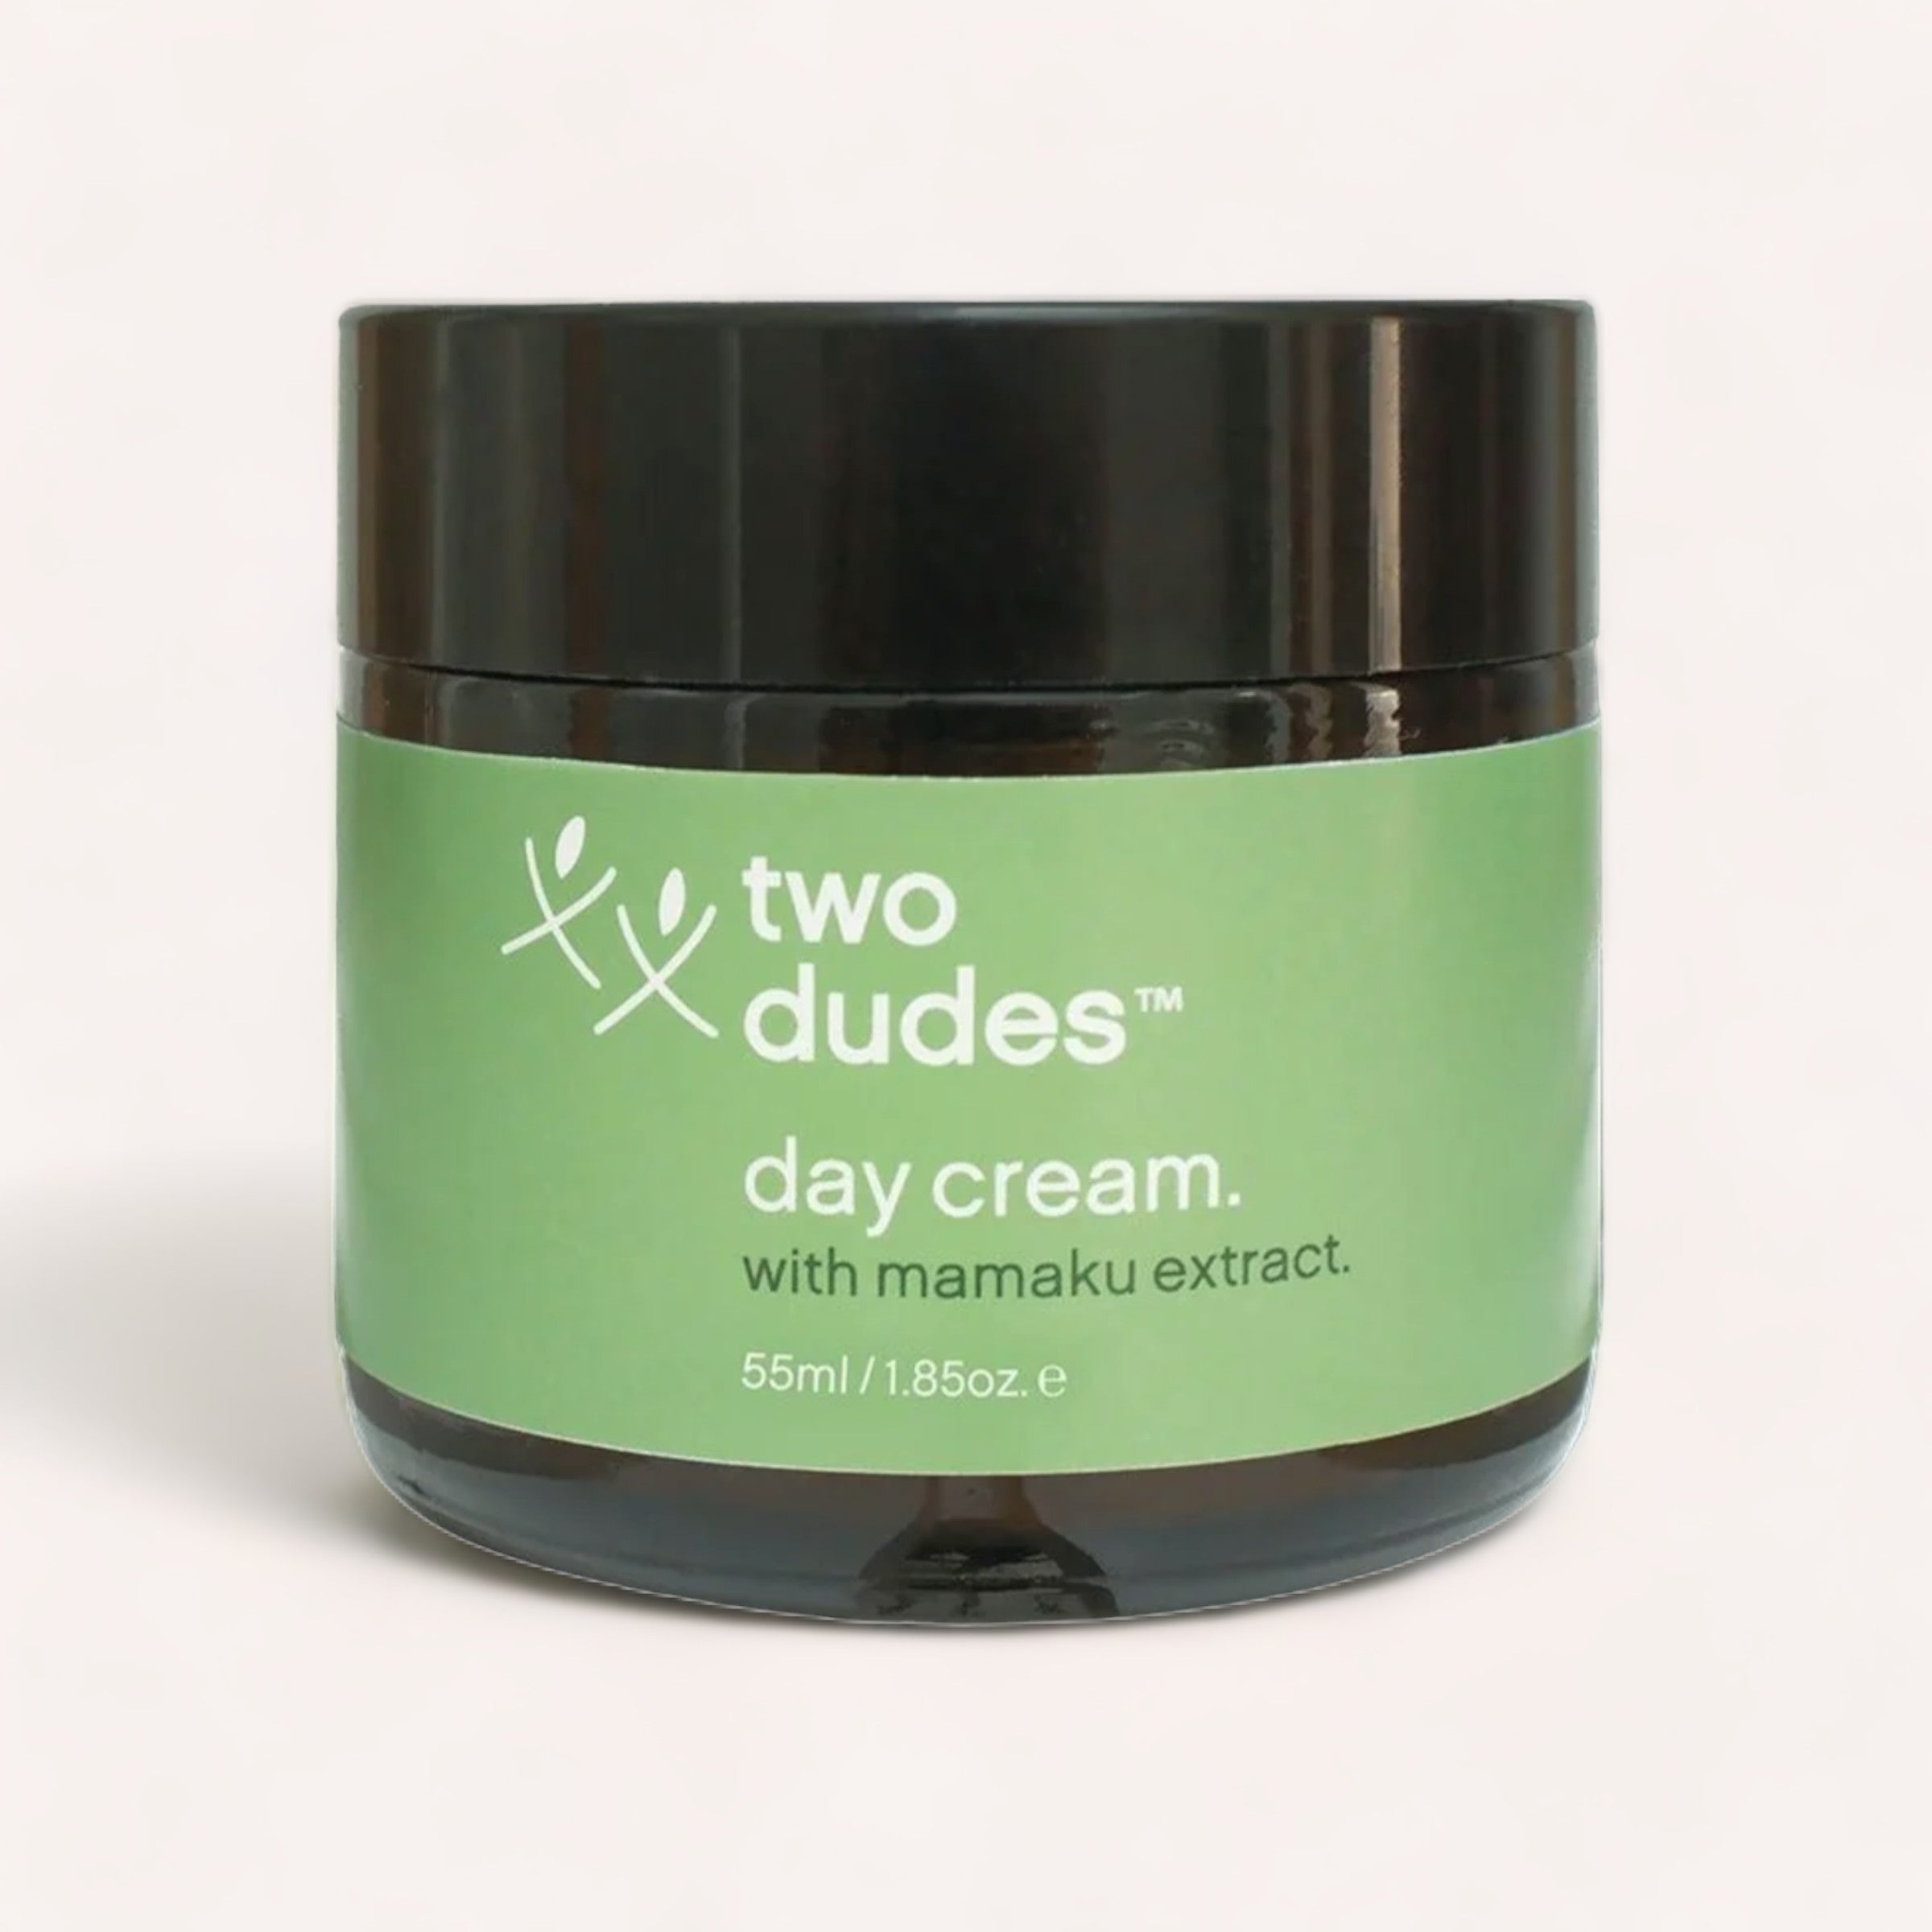 A container of "Two Dudes™ Day Cream by Two Dudes with mamaku extract for skin protection, 55ml / 1.85oz." against a plain background.